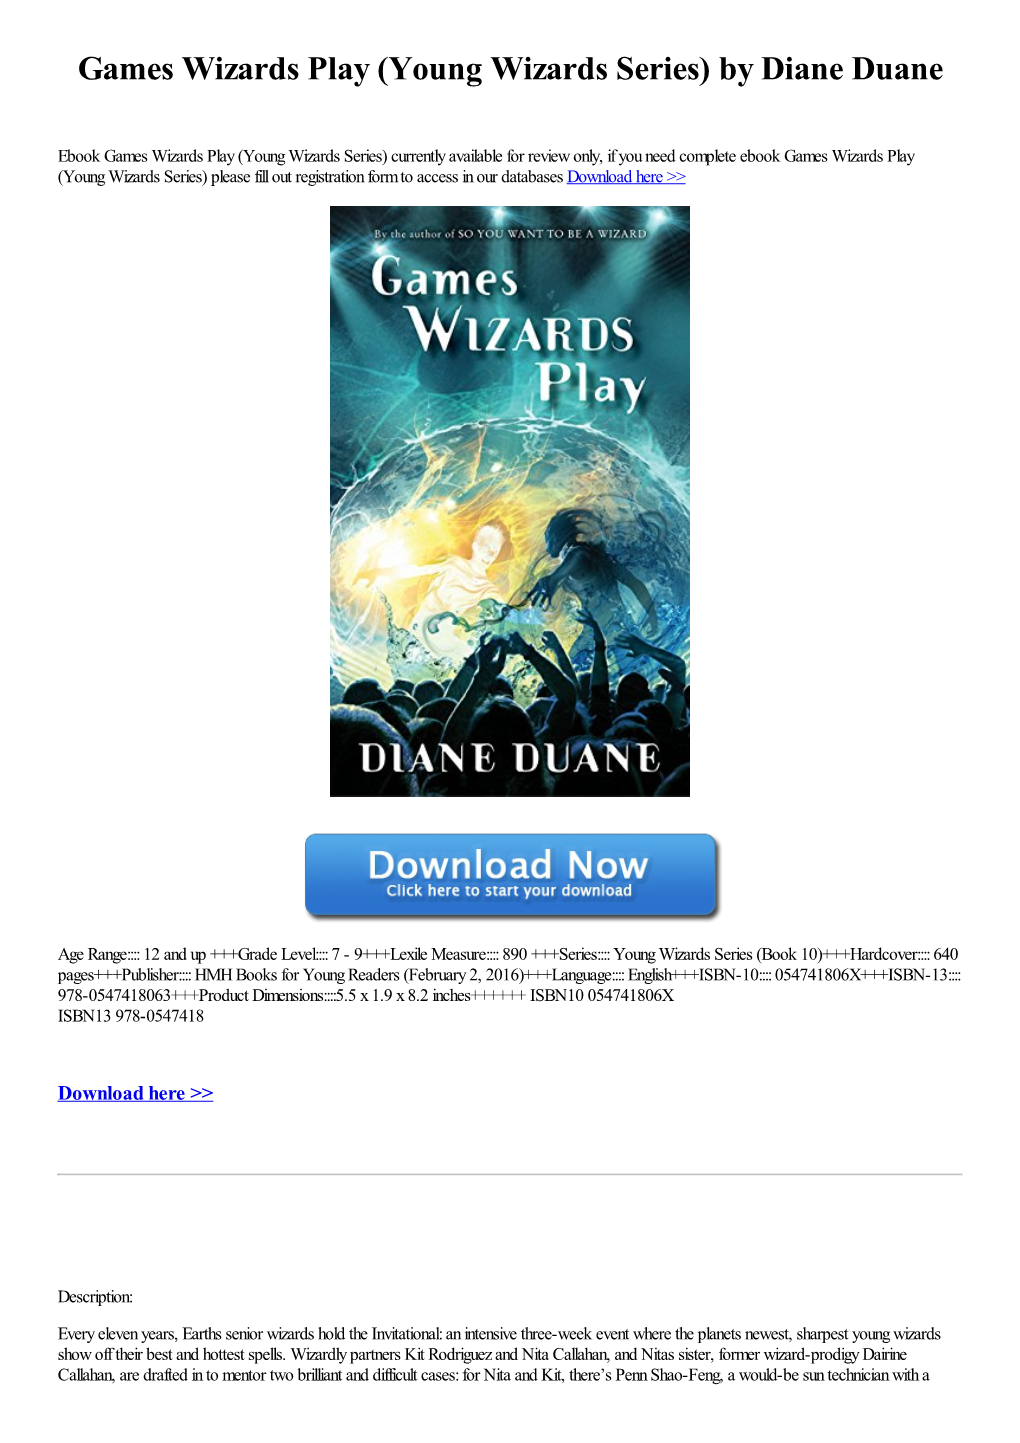 Games Wizards Play (Young Wizards Series) by Diane Duane [Book]